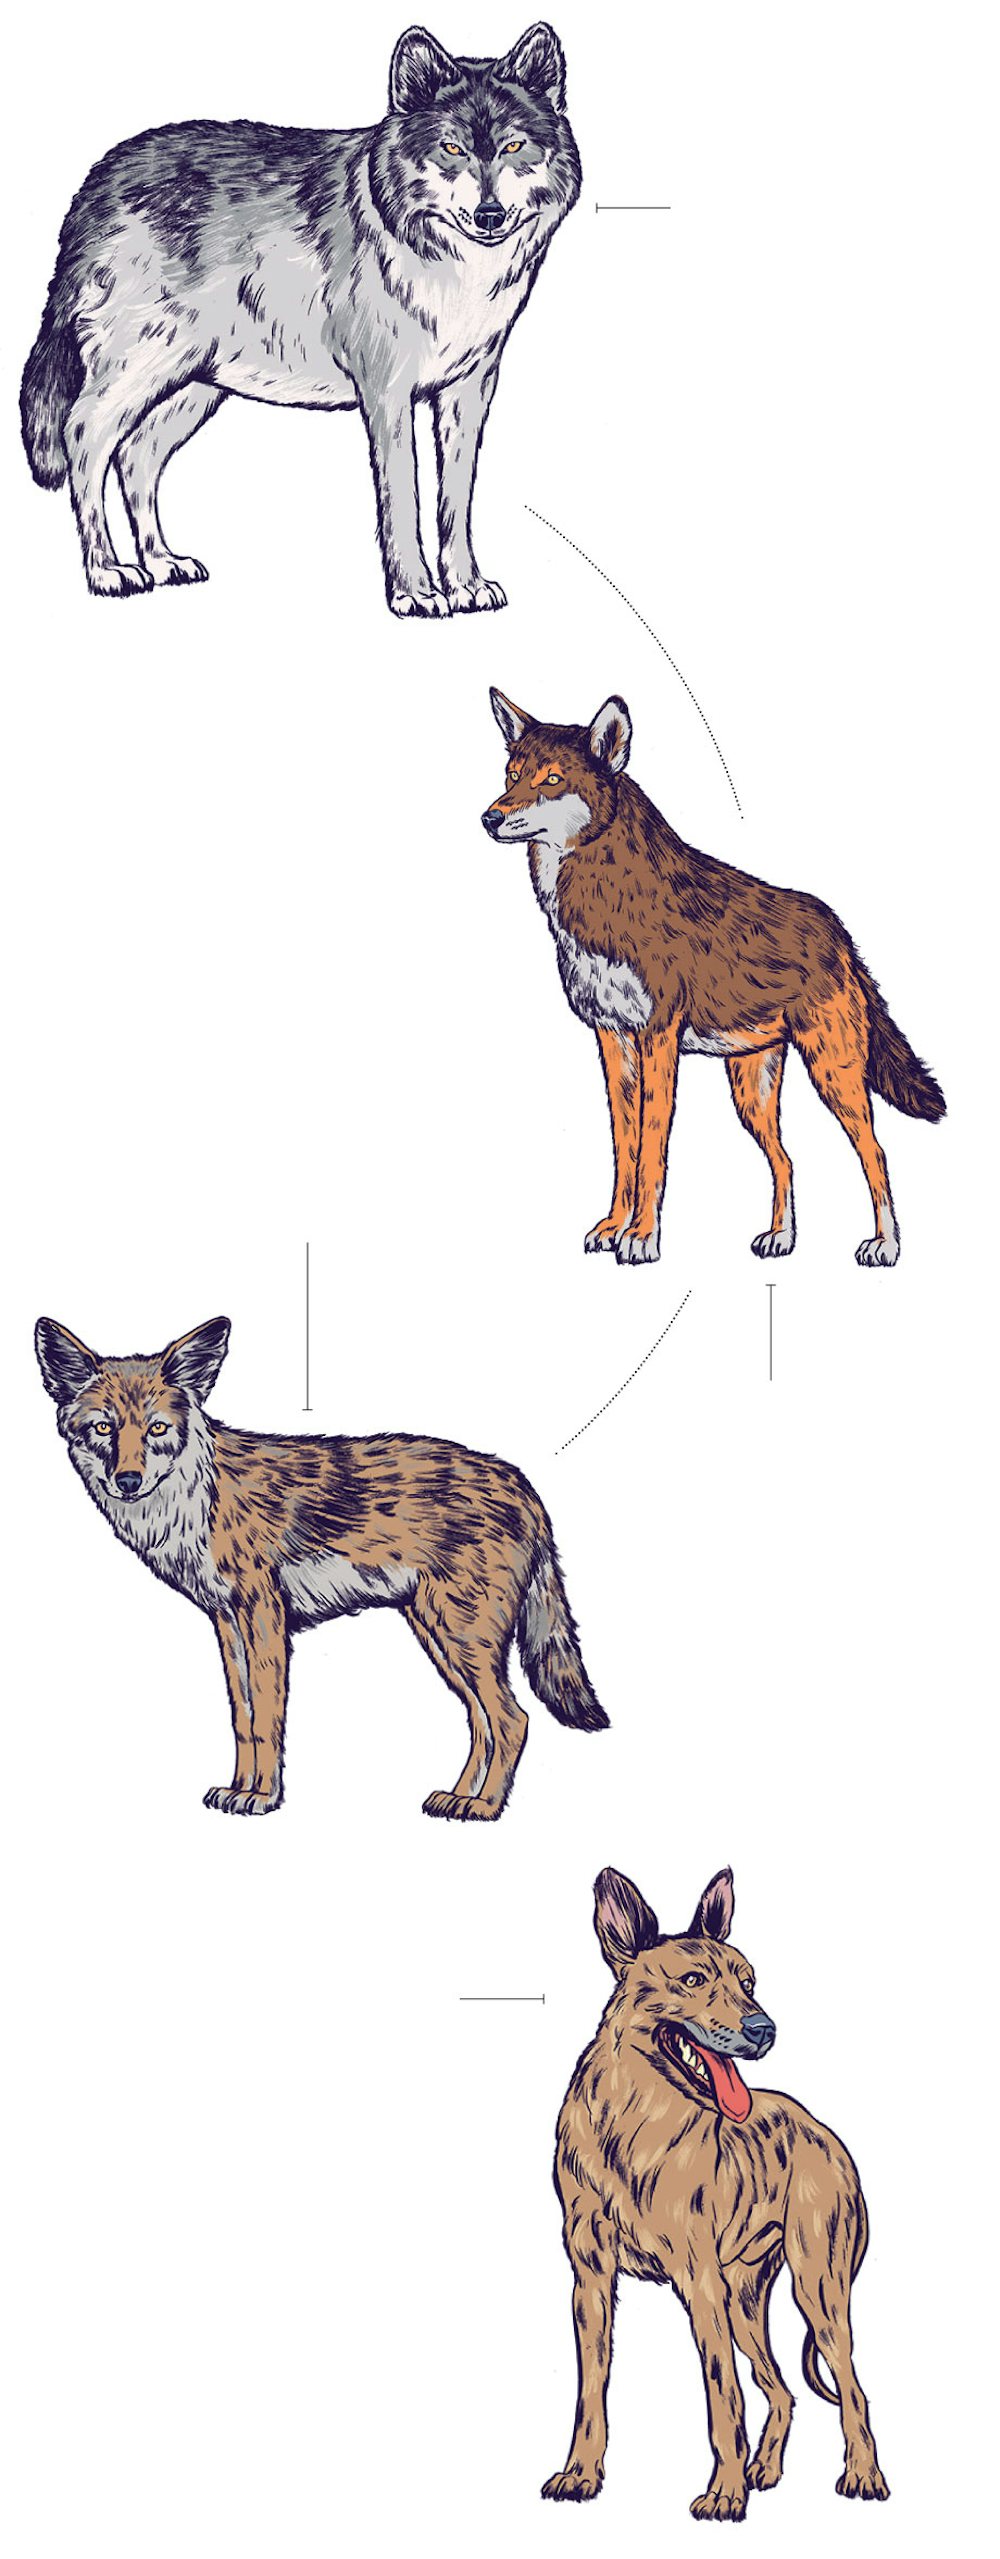 Government study: Red wolves a unique species, not coyote hybrid - OBX Today